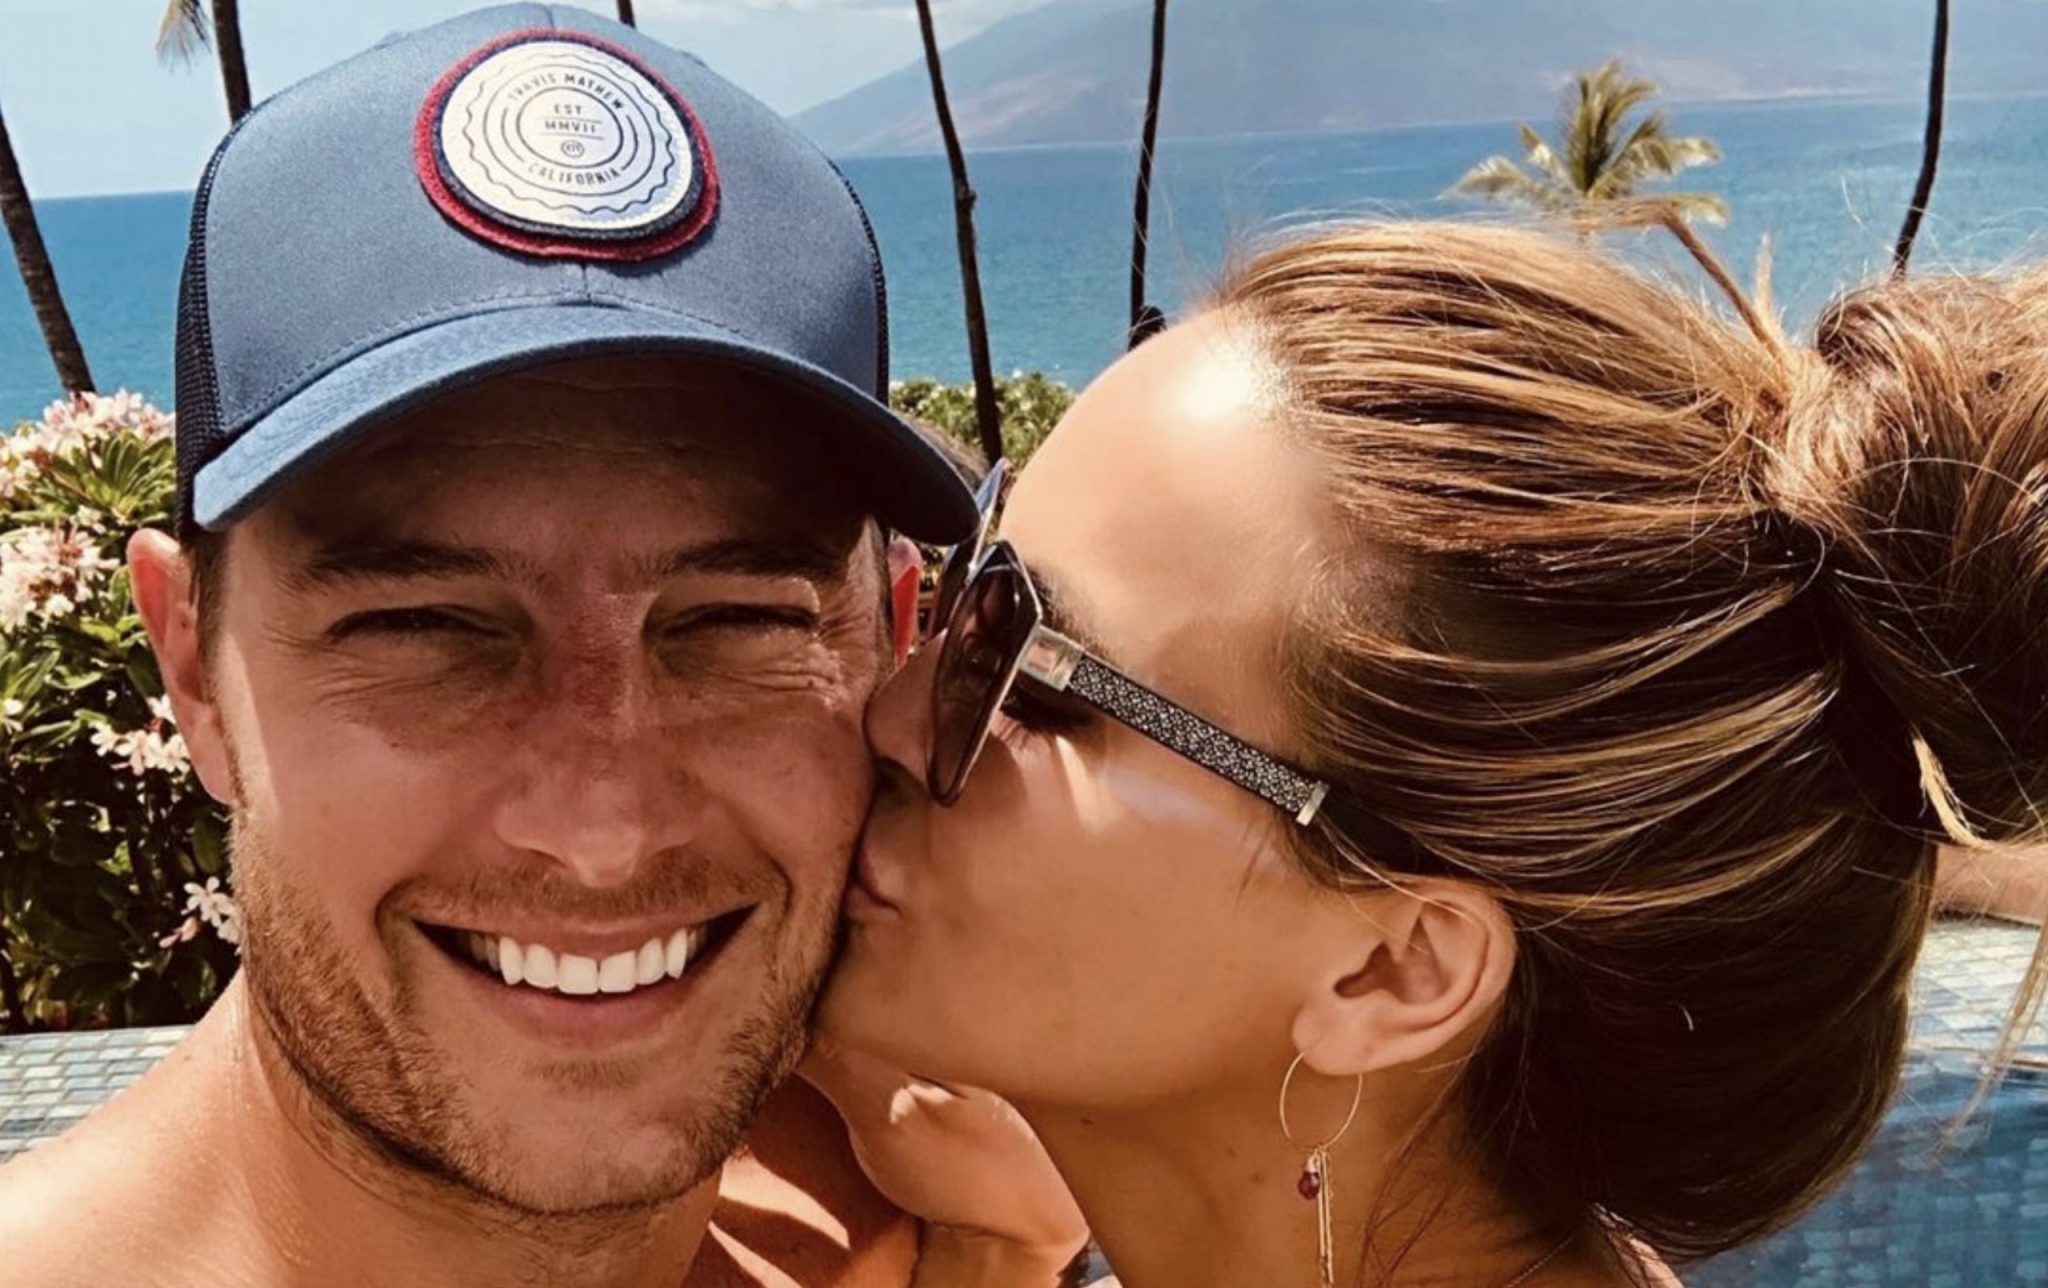 Justin Hartley, Chrishell Stause, Selling Sunset-https://www.instagram.com/p/By5pIwEnkxu/